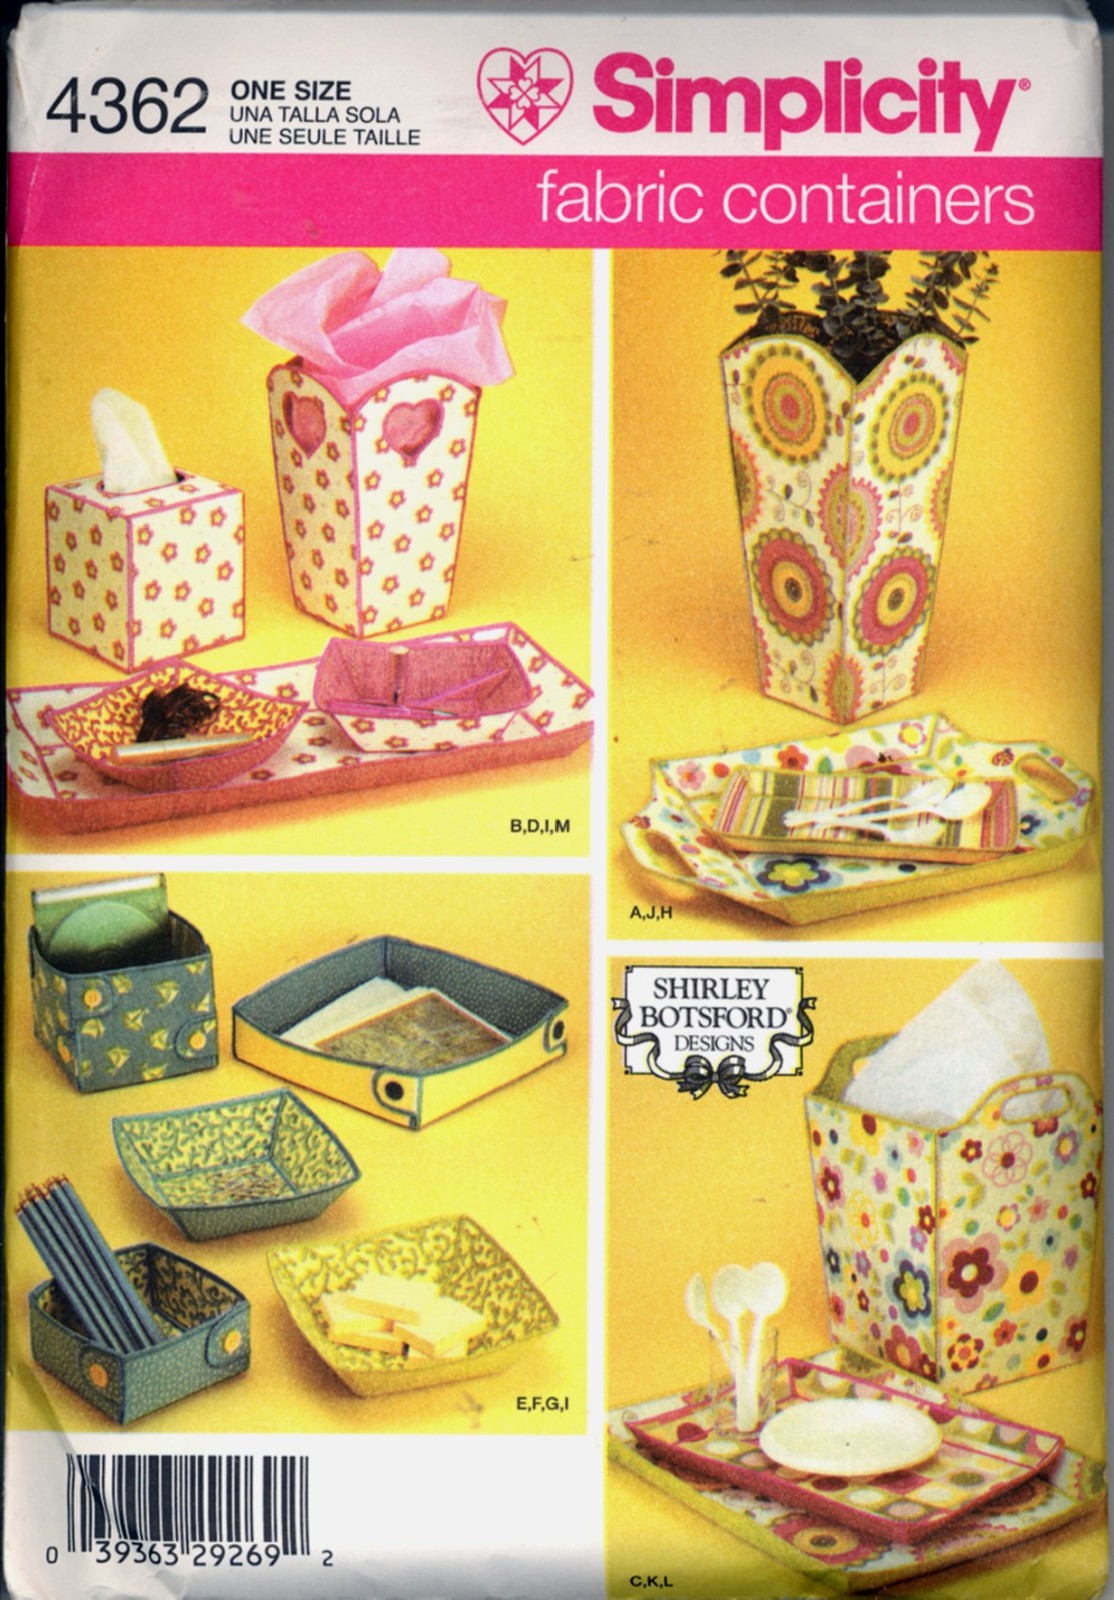 Uncut Shirley Botsford Fabric Container Vase Tray Simplicity 4362 Sewing Pattern - $6.99